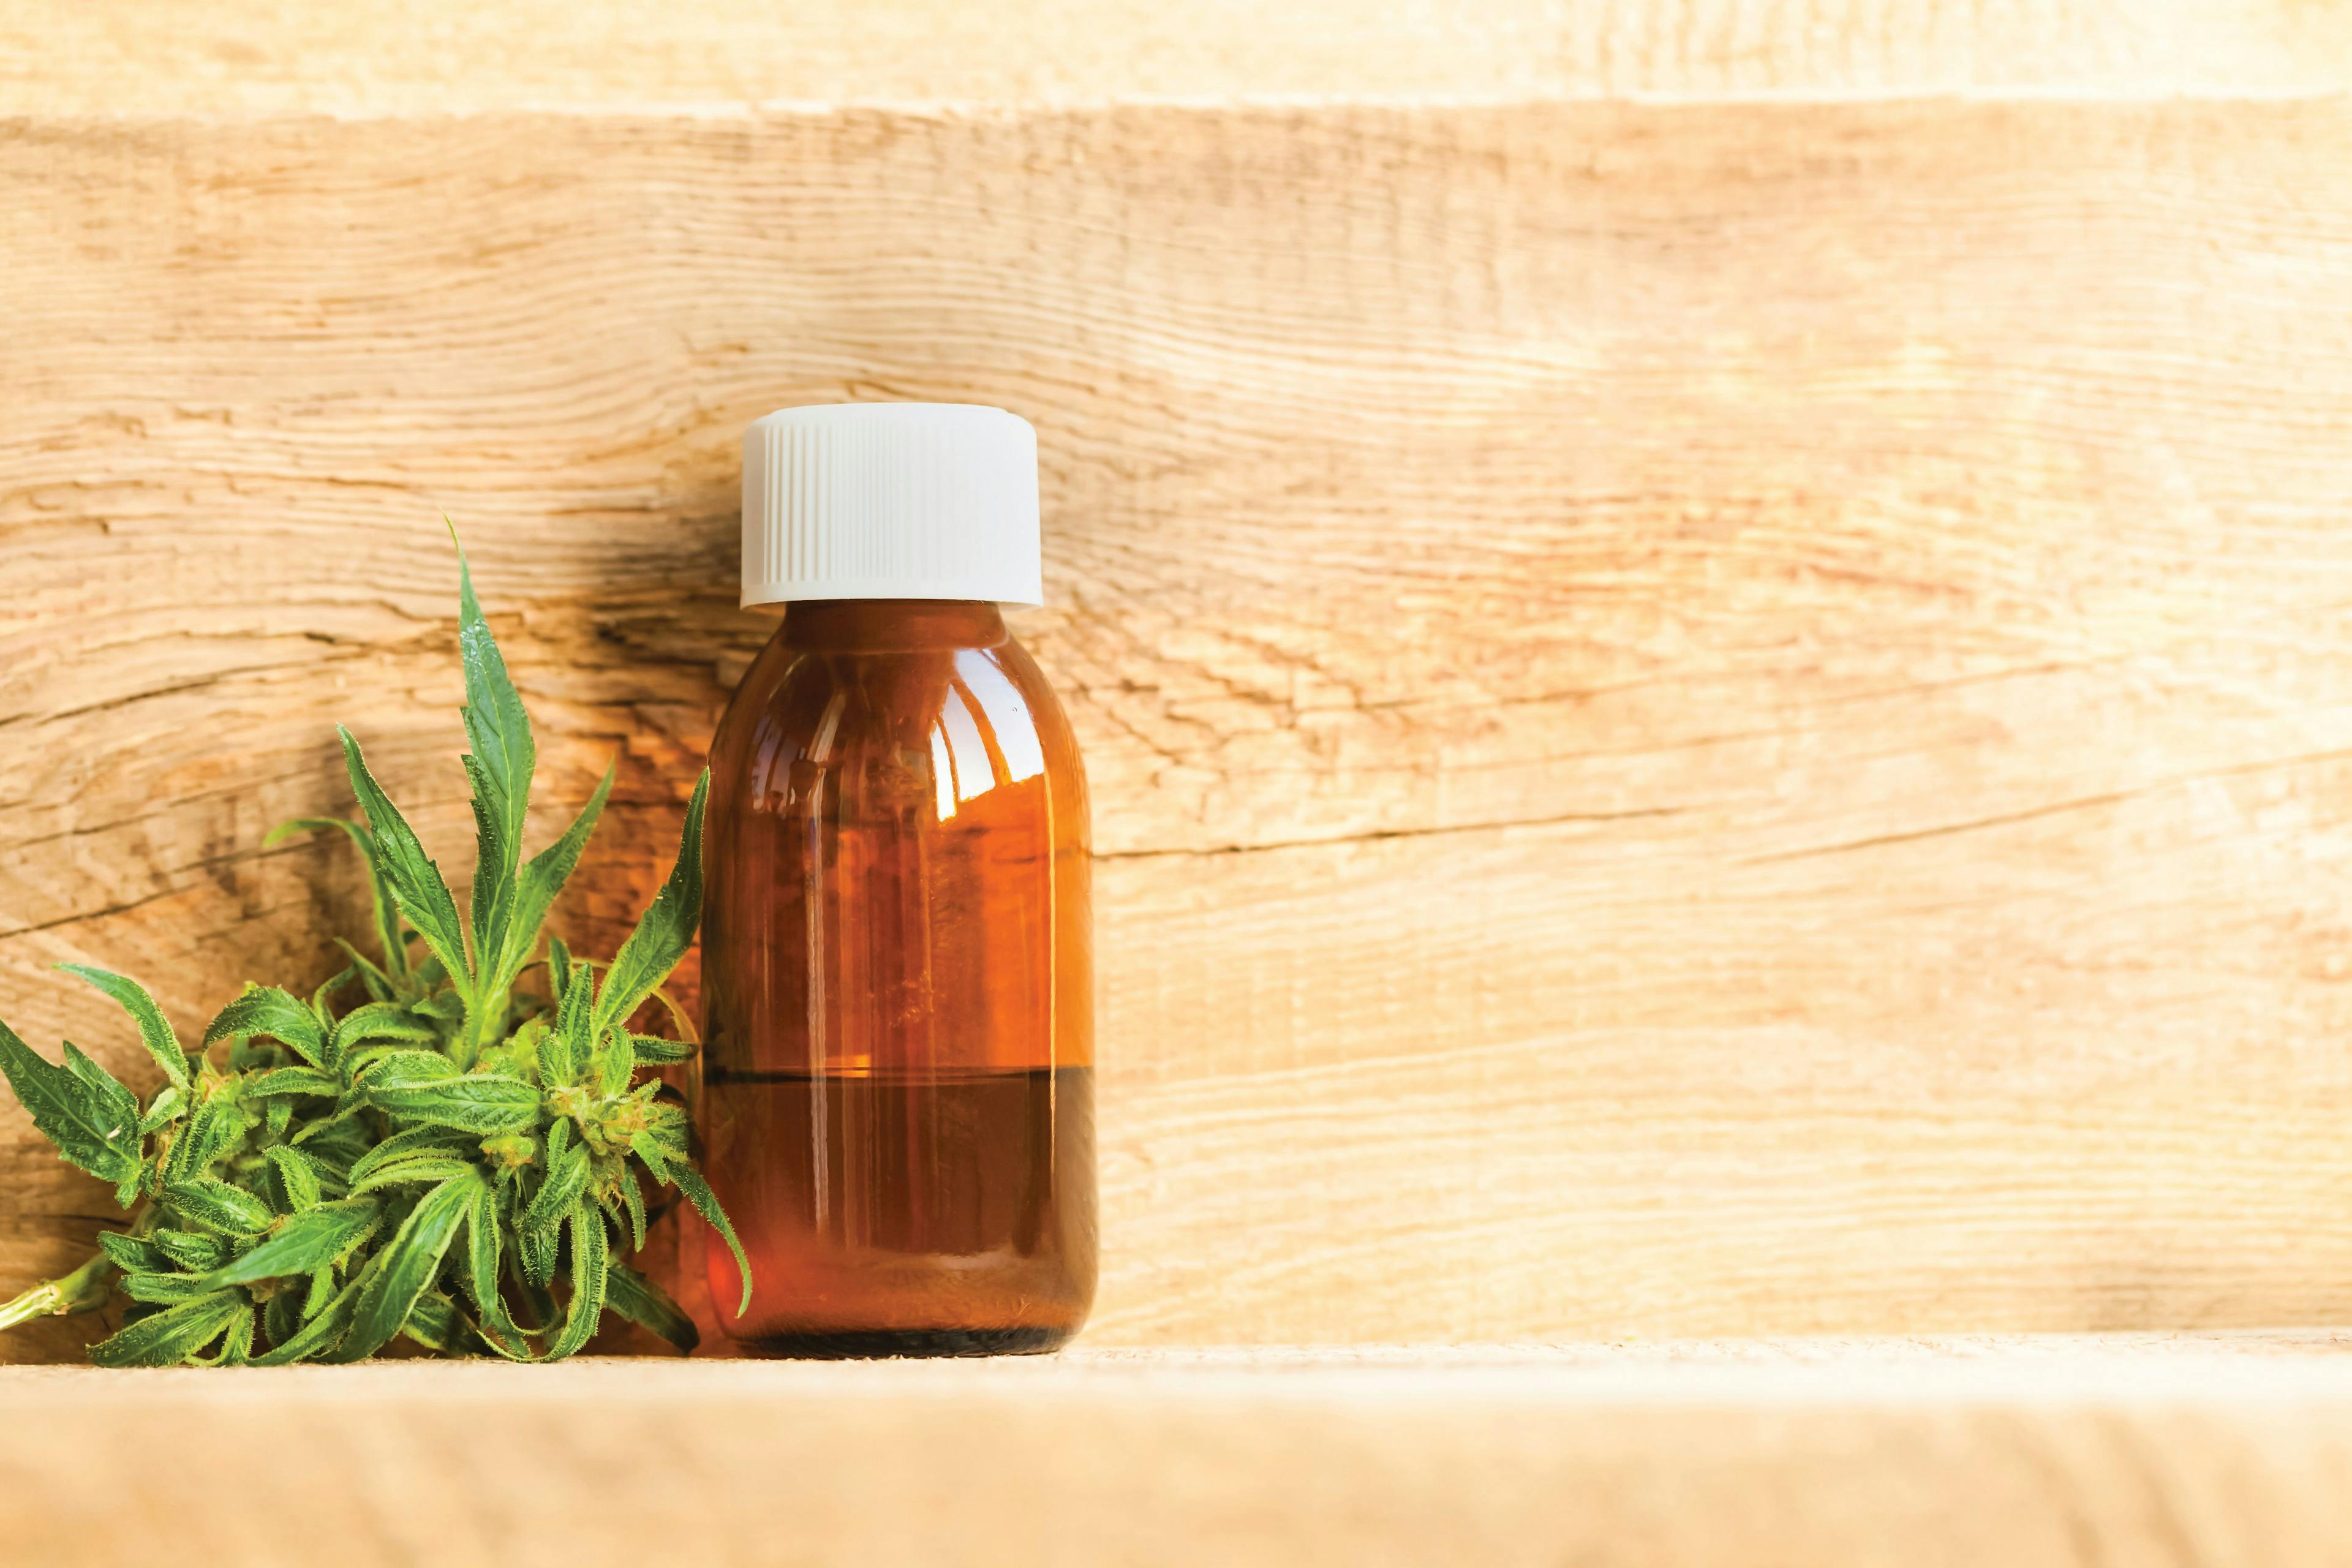 Year in Review: 2021 Top CBD News from Drug Topics®